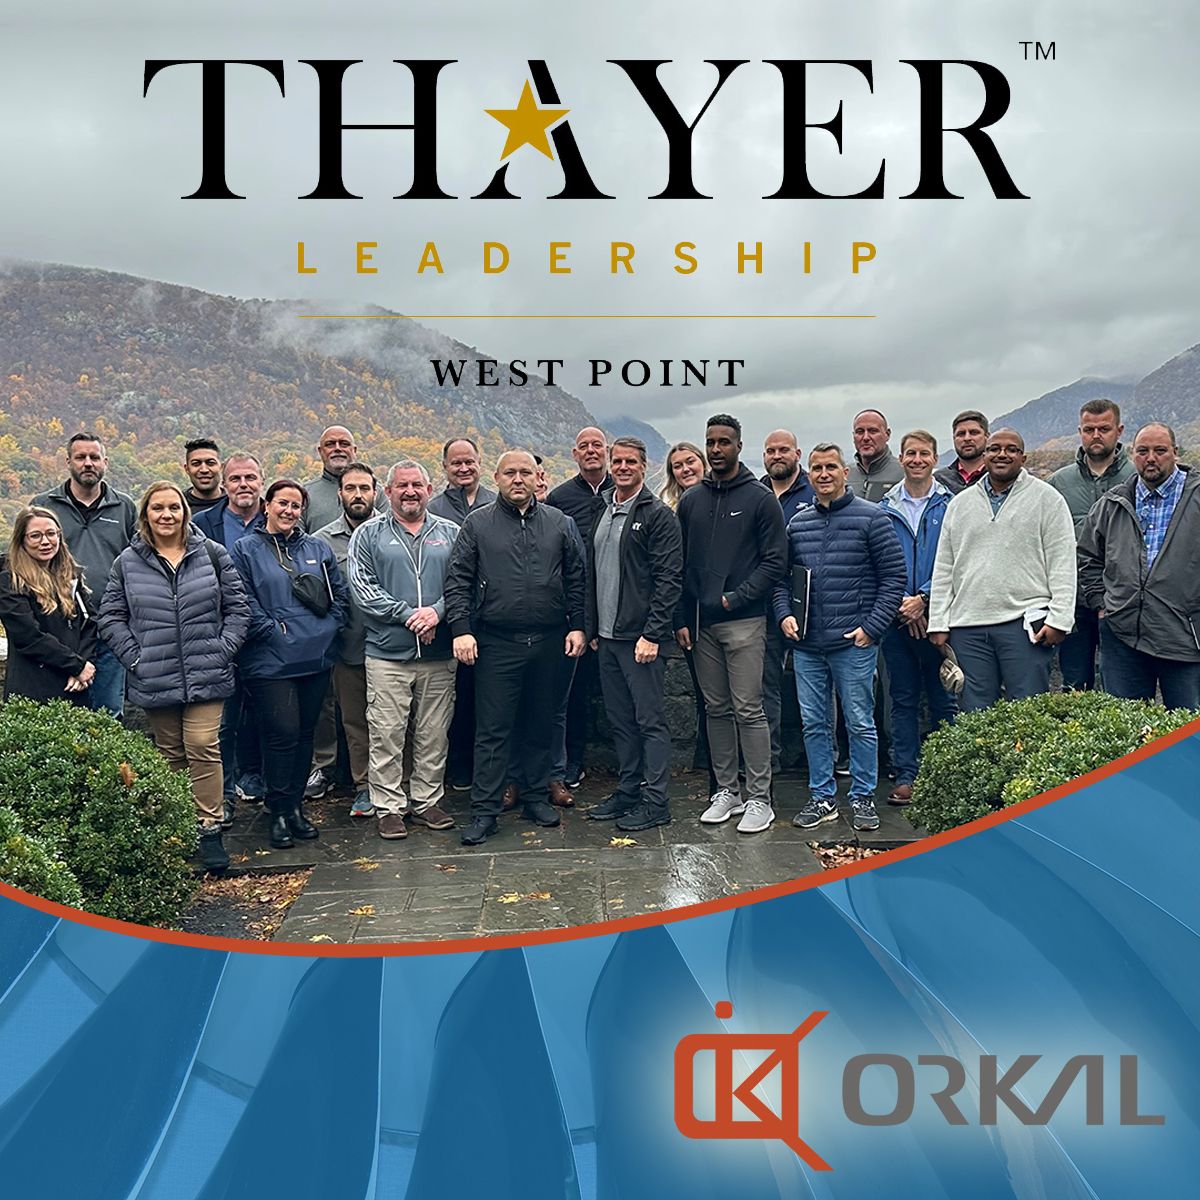 orkal, orkal industries team at a thayer leadership aerospace event showcasing their premium aircraft grade assembly solutions and tooling.